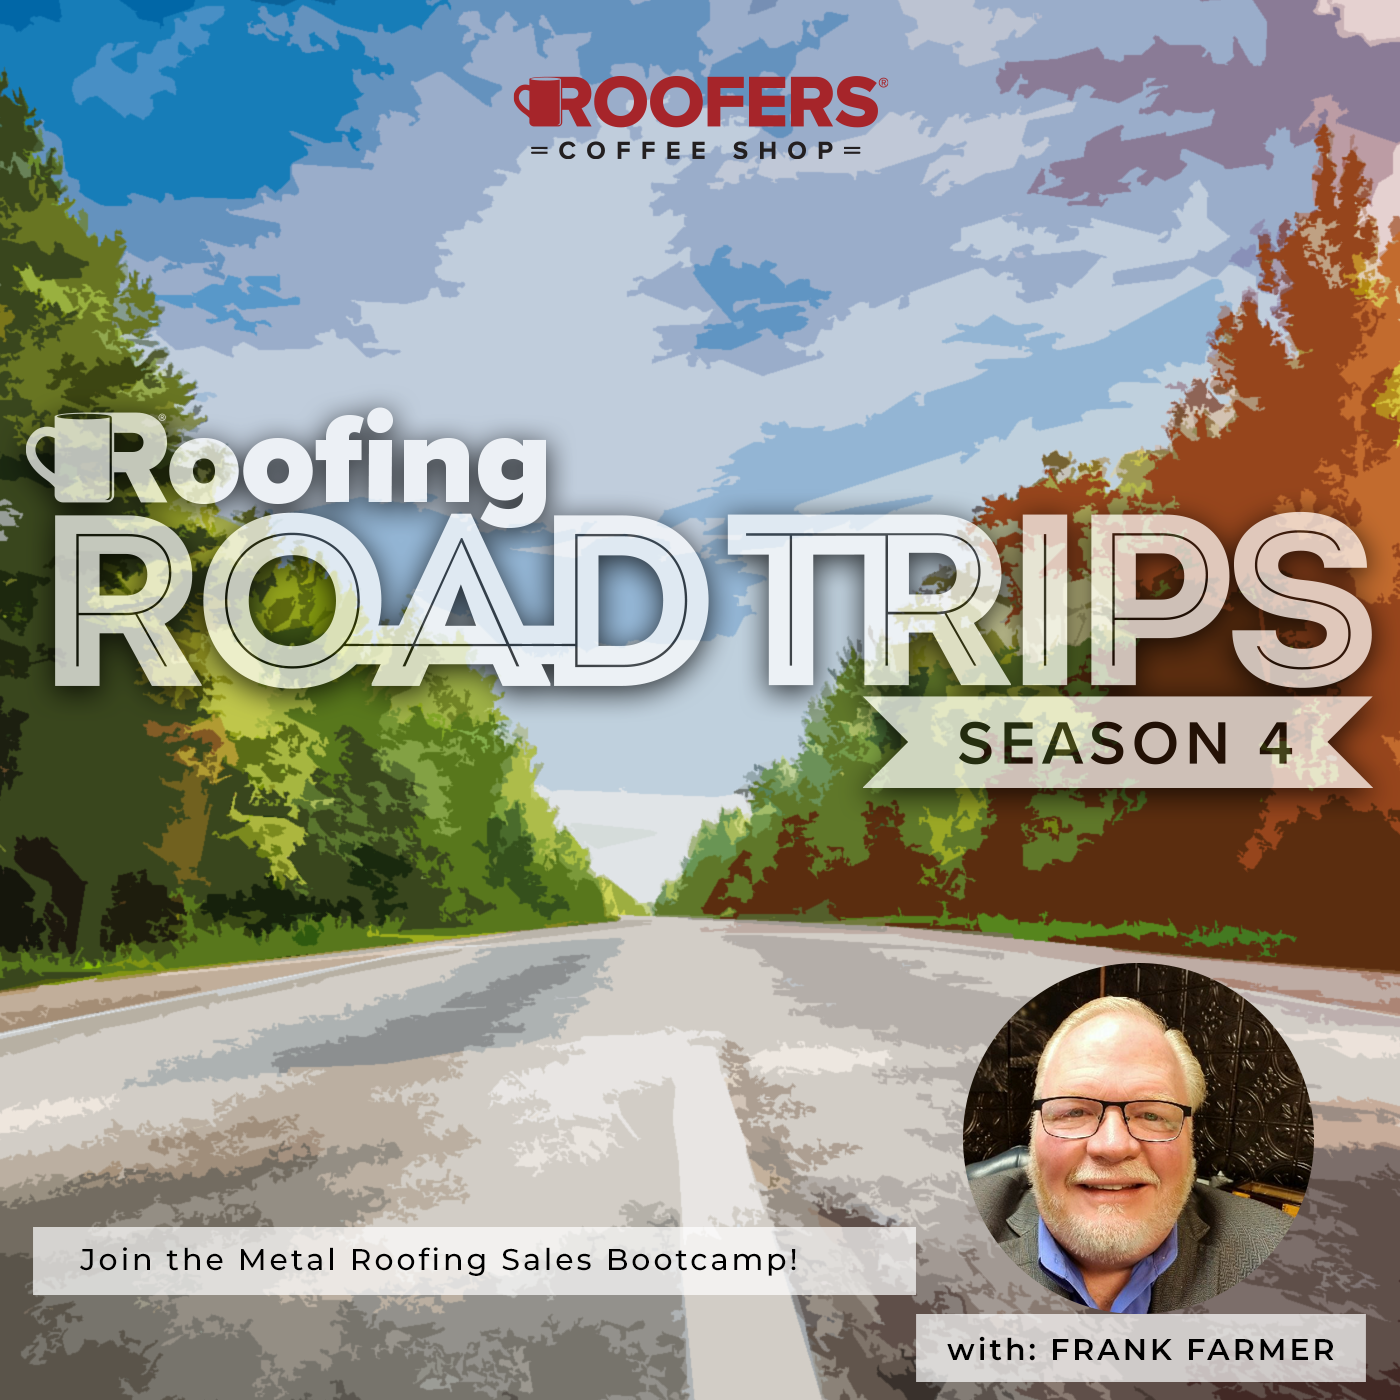 Frank Farmer - Join the Metal Roofing Sales Bootcamp!